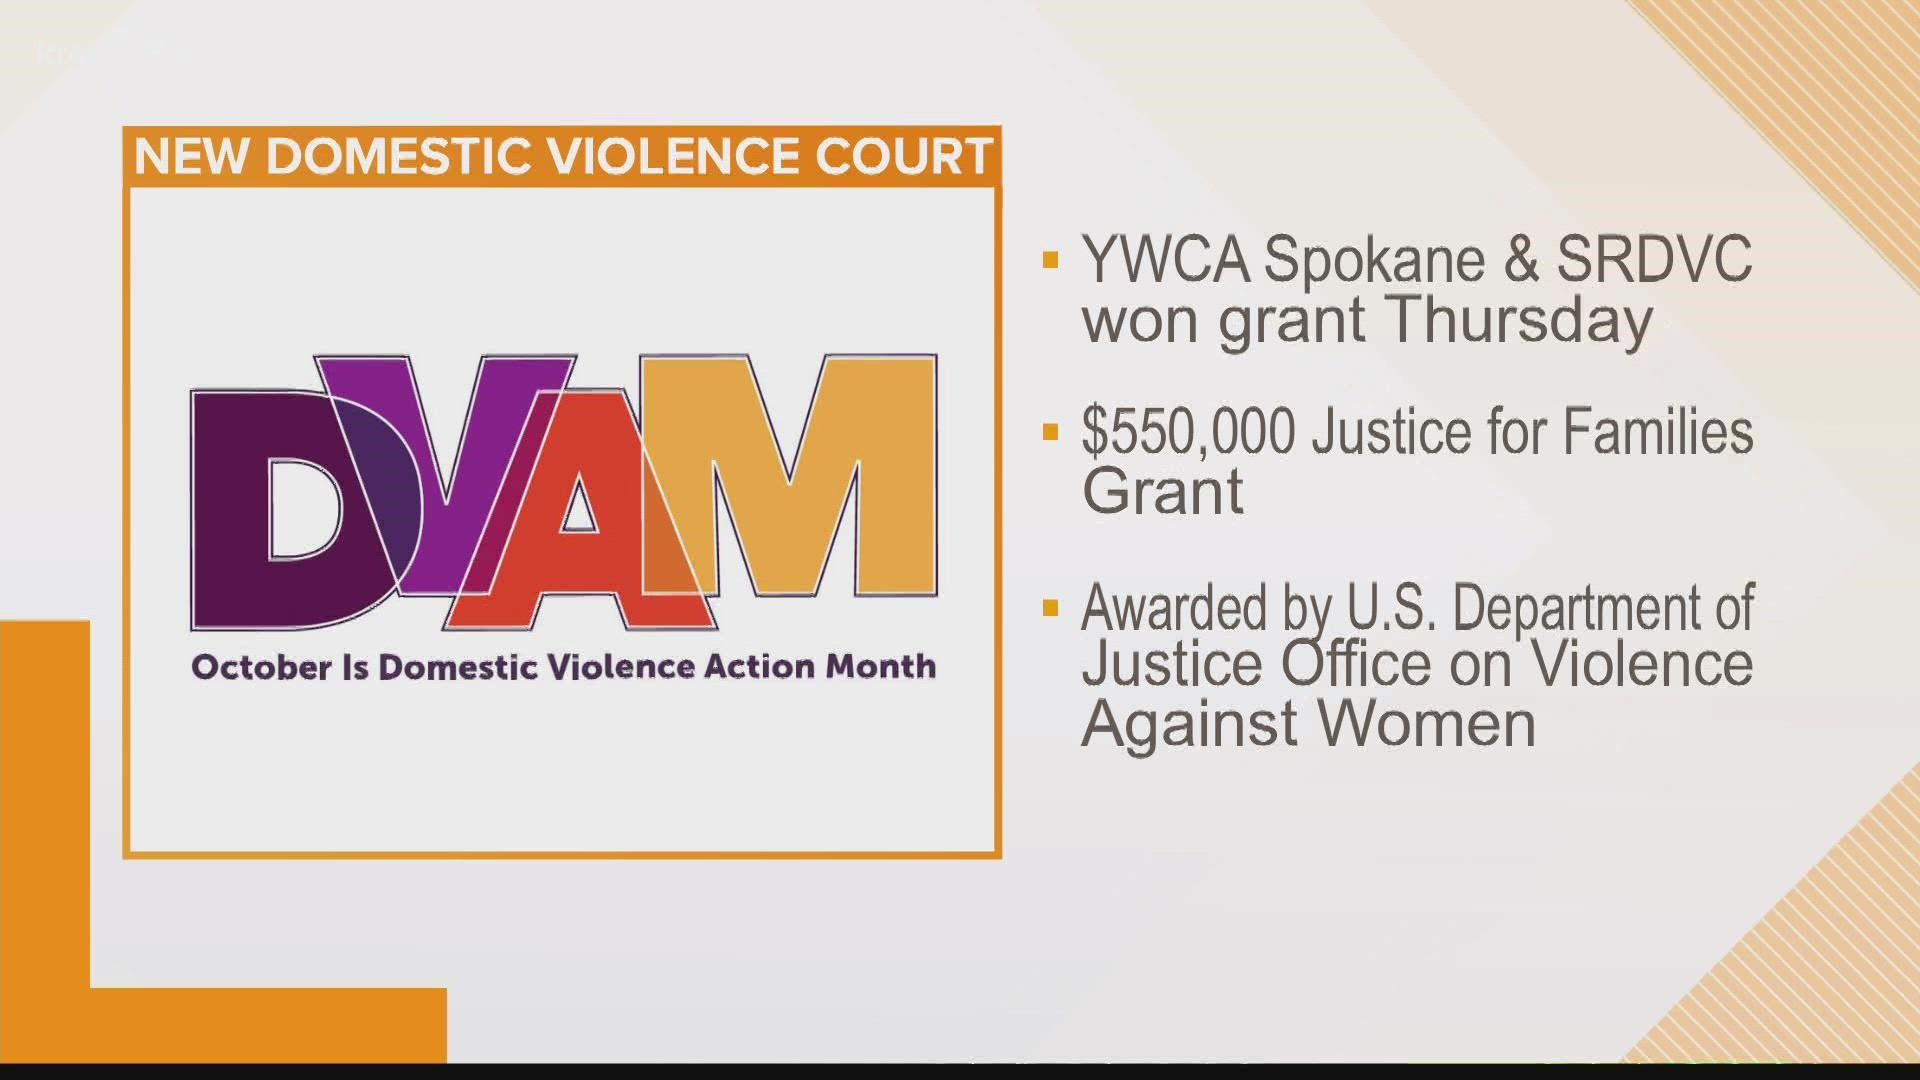 YWCA Spokane and SRDVC received a grant to open a new domestic violence court in the city of Spokane.